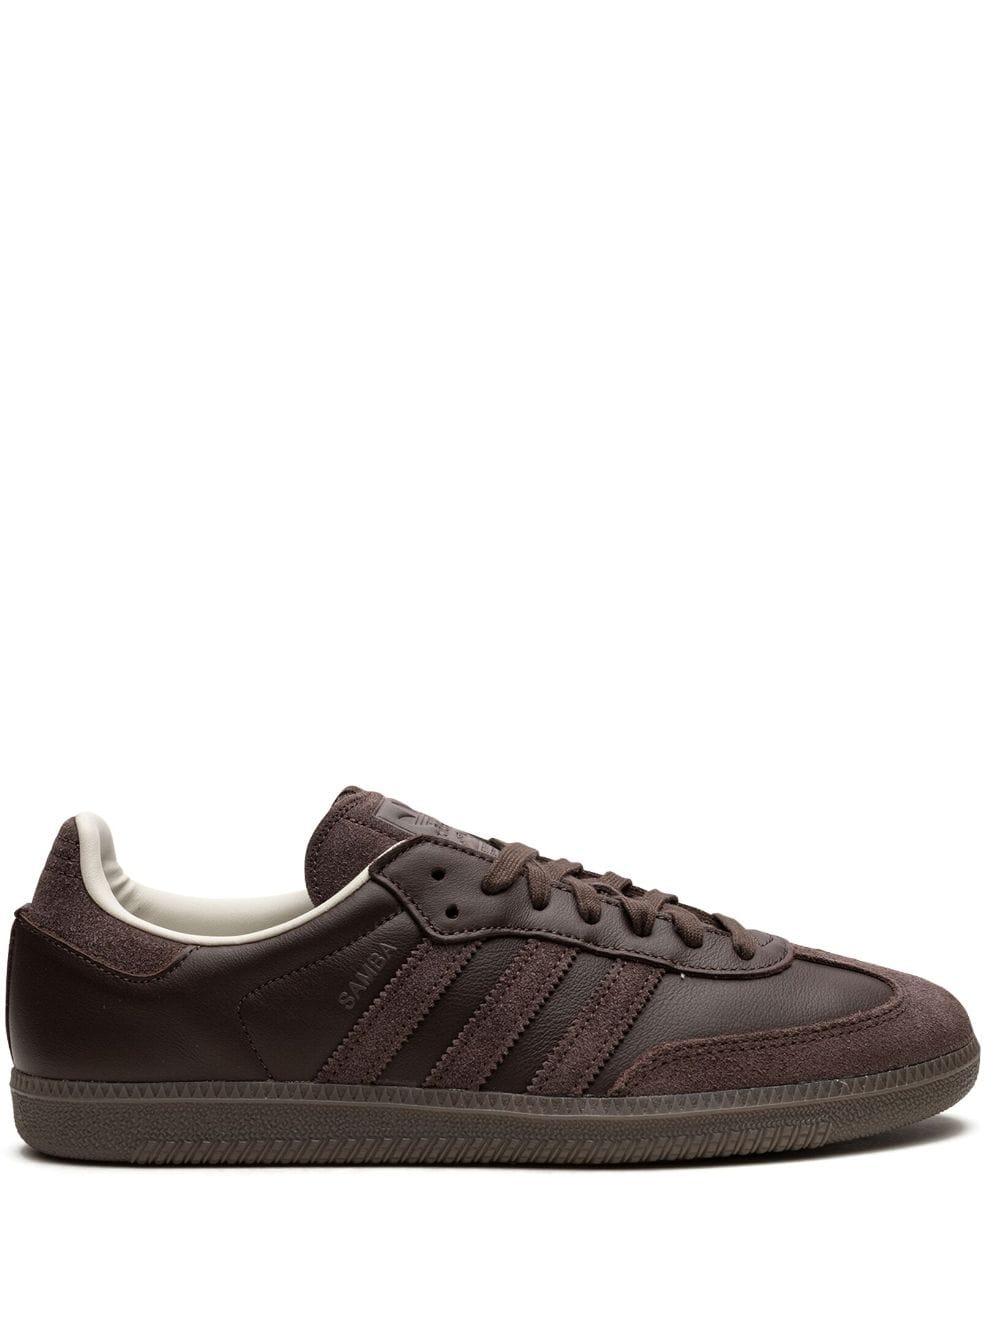 Inactief is er vertrouwen adidas Samba "brown/off White" Sneakers | Lyst